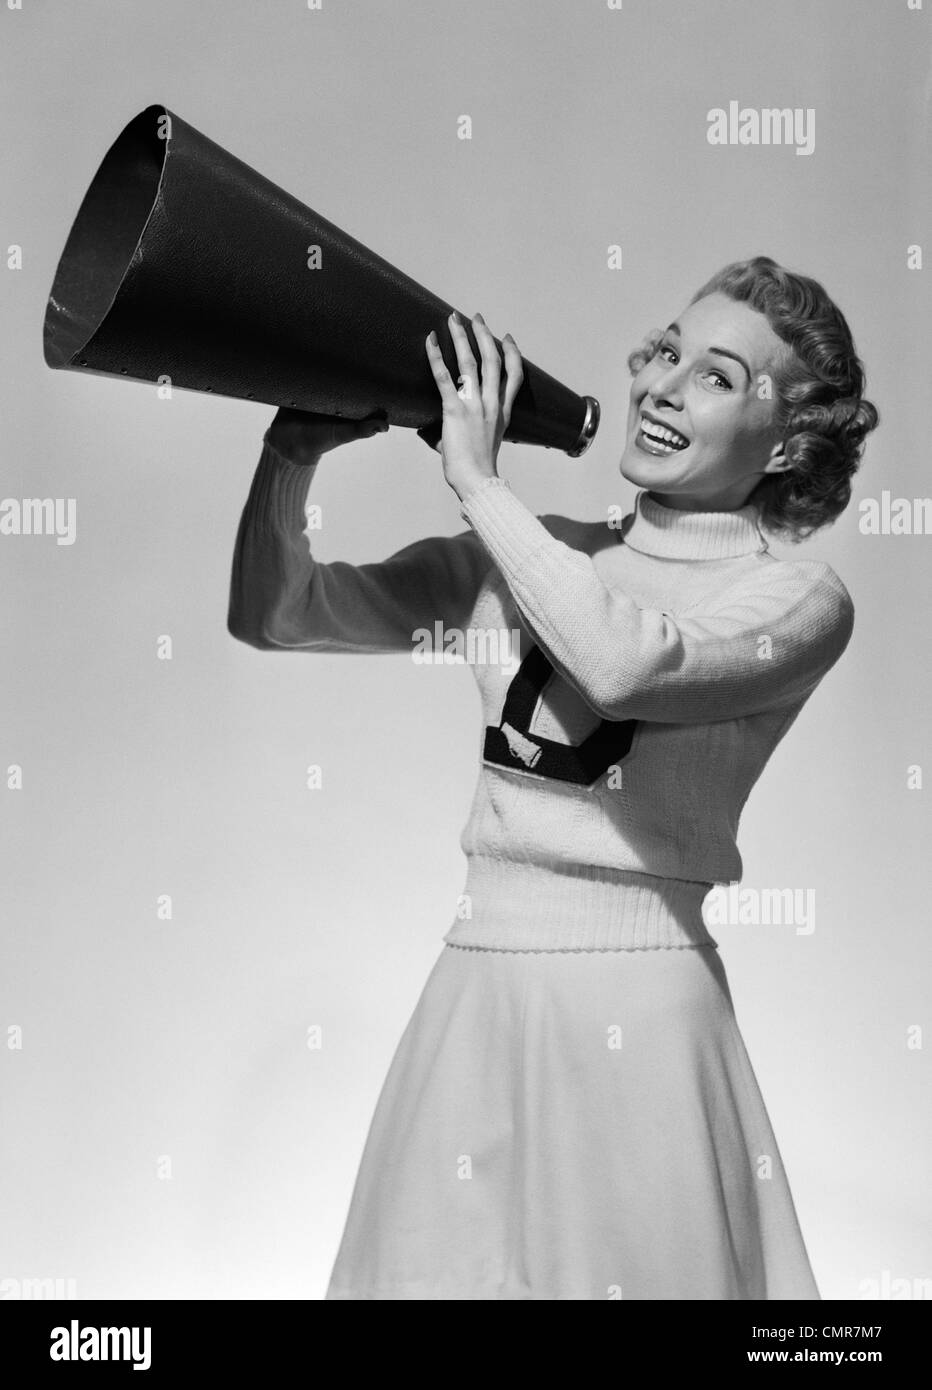 1950s PORTRAIT SMILING TEENAGE GIRL CHEERLEADER IN SWEATER AND LONG SKIRT CHEERING THROUGH MEGAPHONE LOOKING AT CAMERA Stock Photo